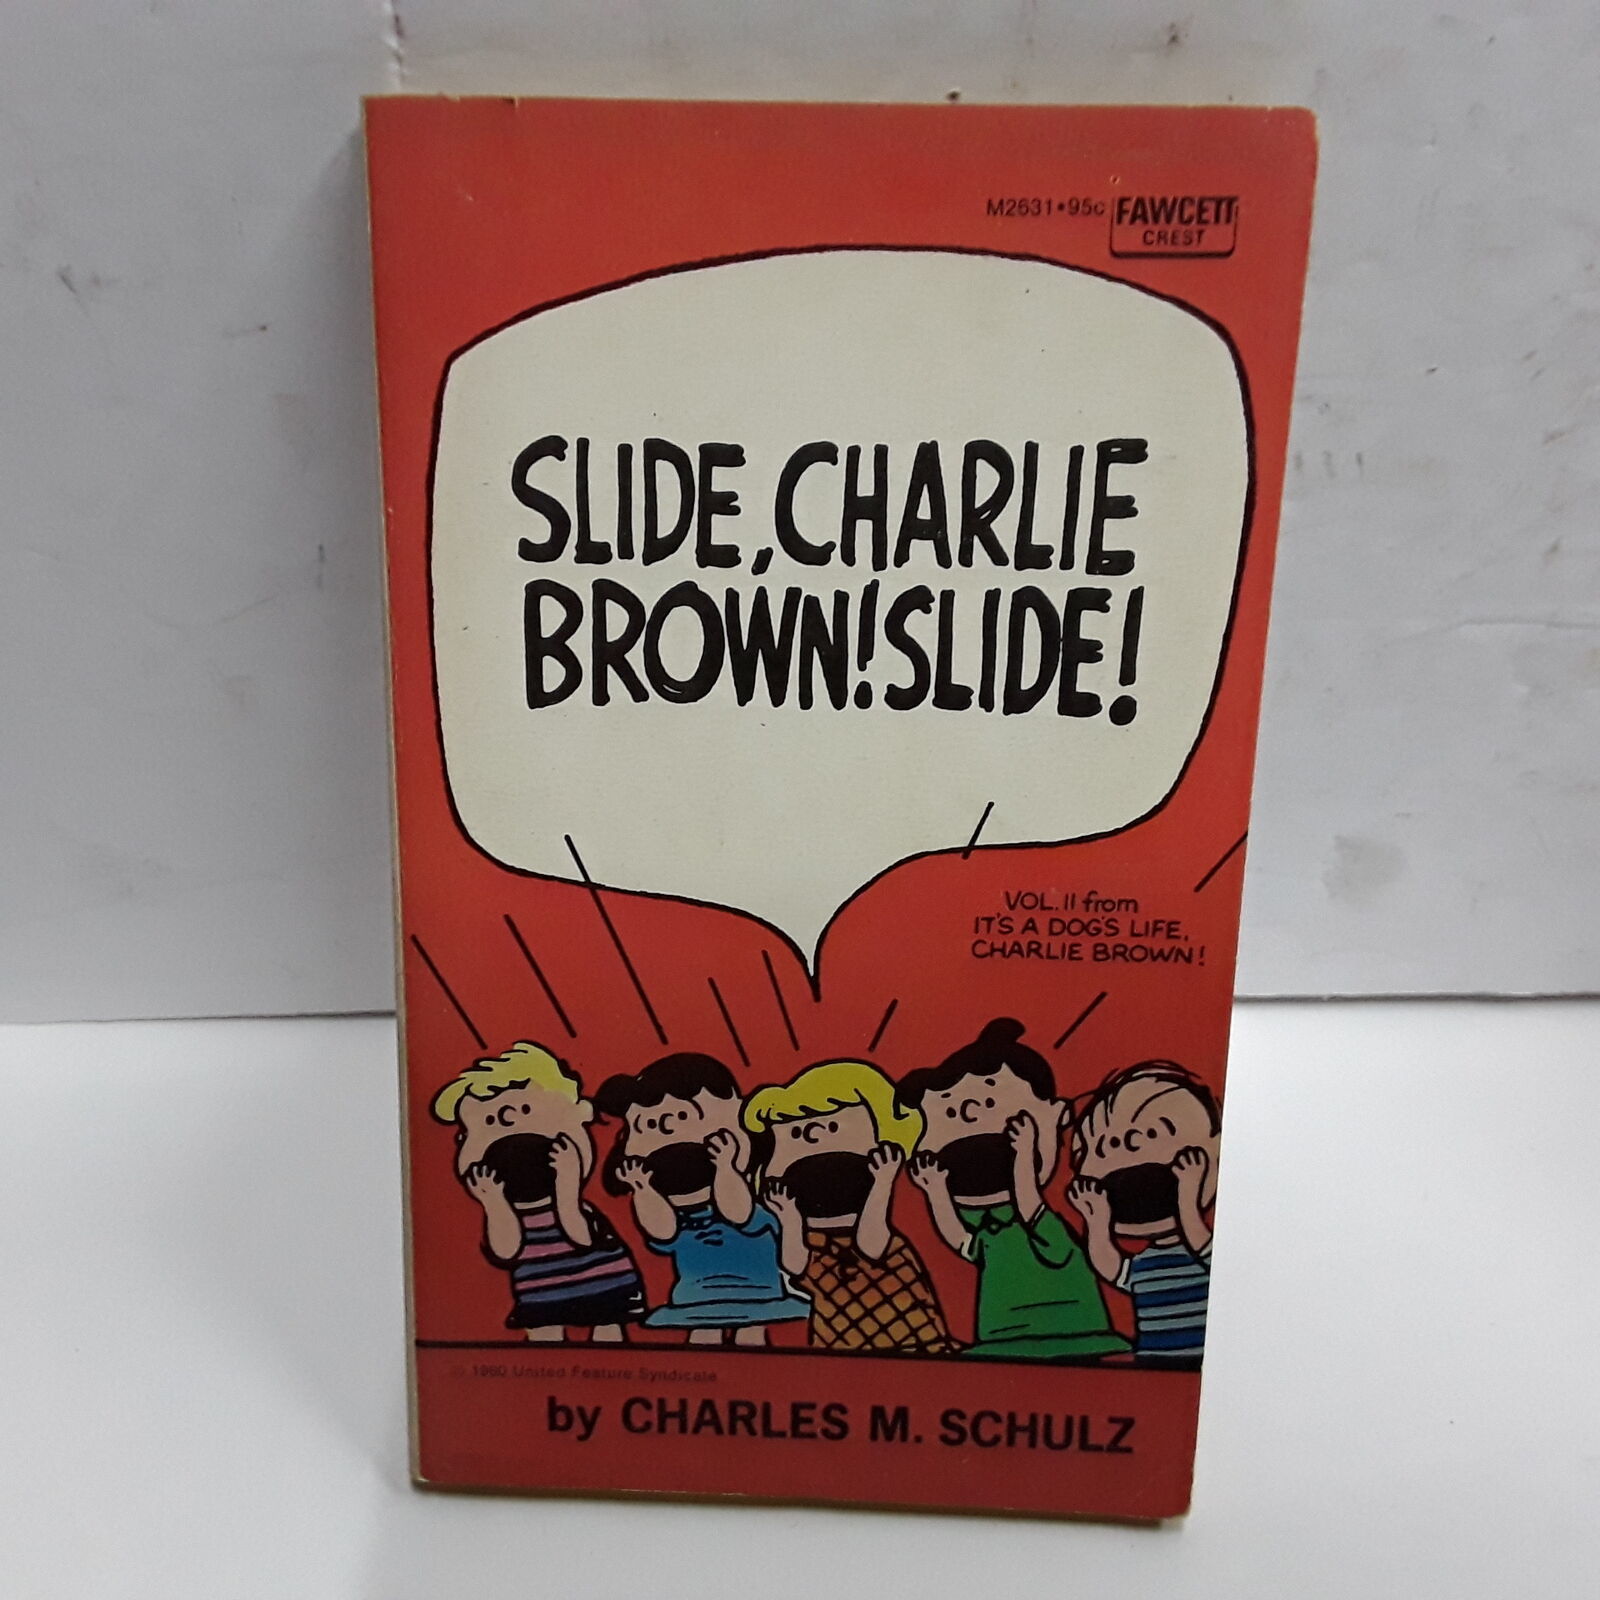 Slide, Charlie Brown! Slide!, Vol. 2: From and similar items